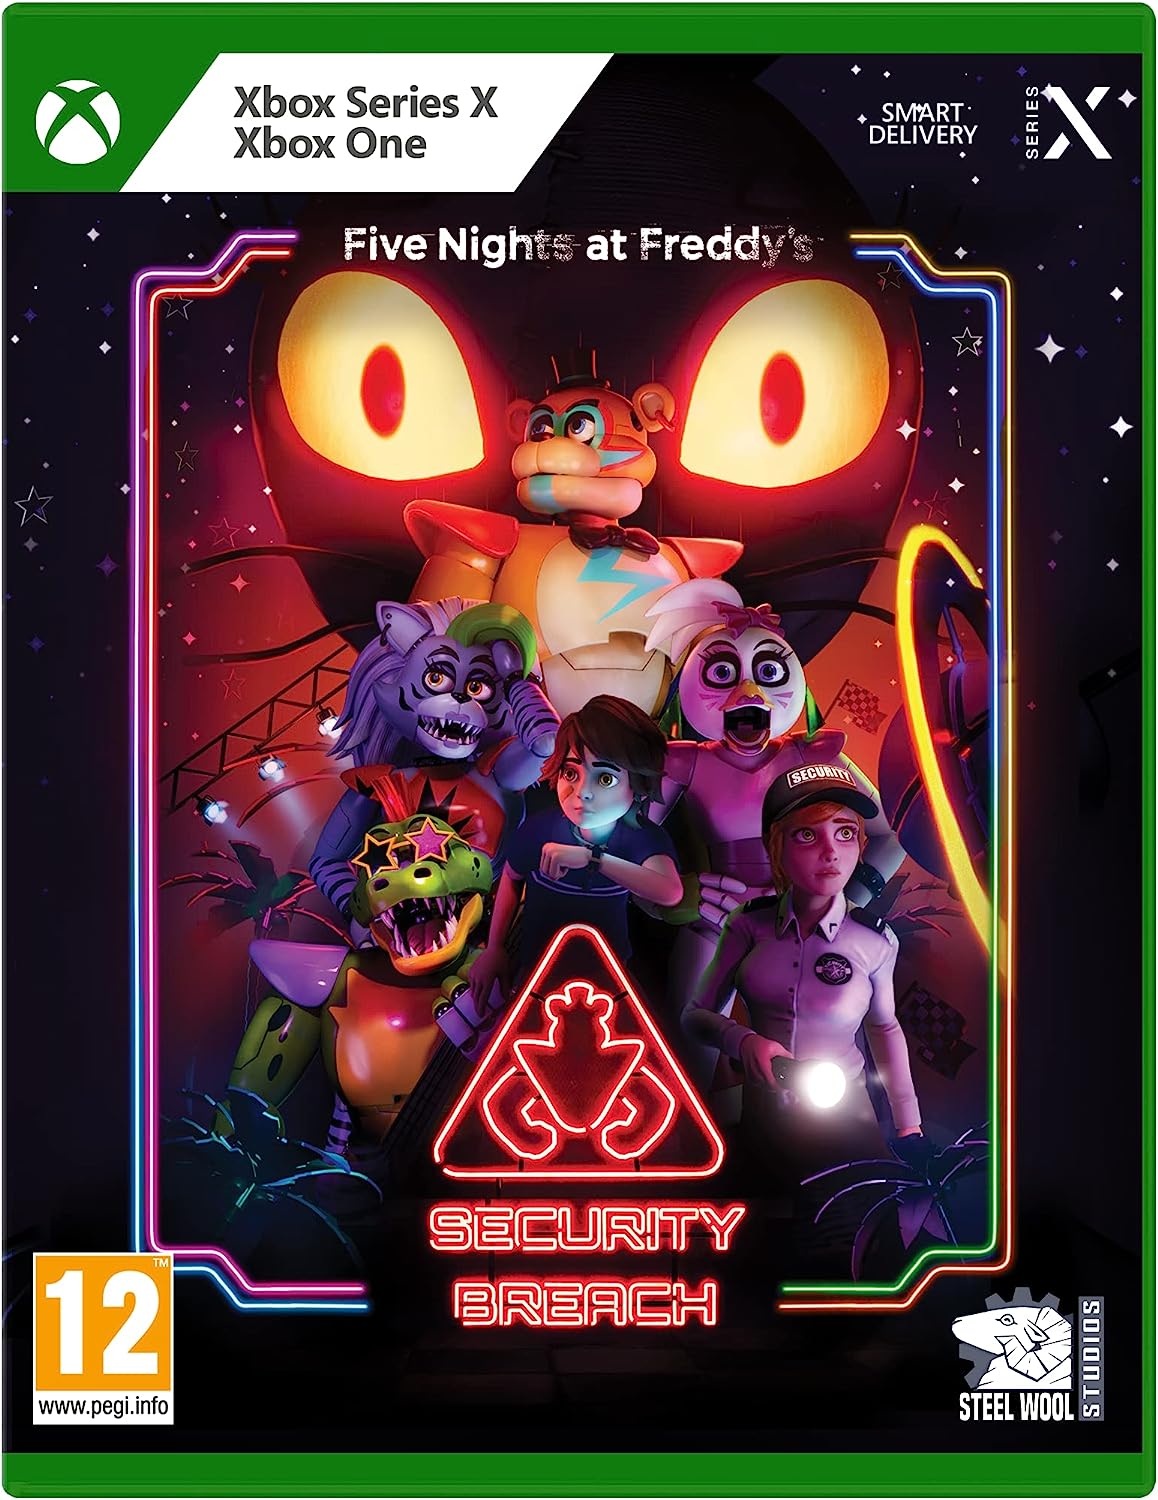 Five Nights at Freddy's: Security Breach Download Key for Xbox One / Series  X (Digital Download)